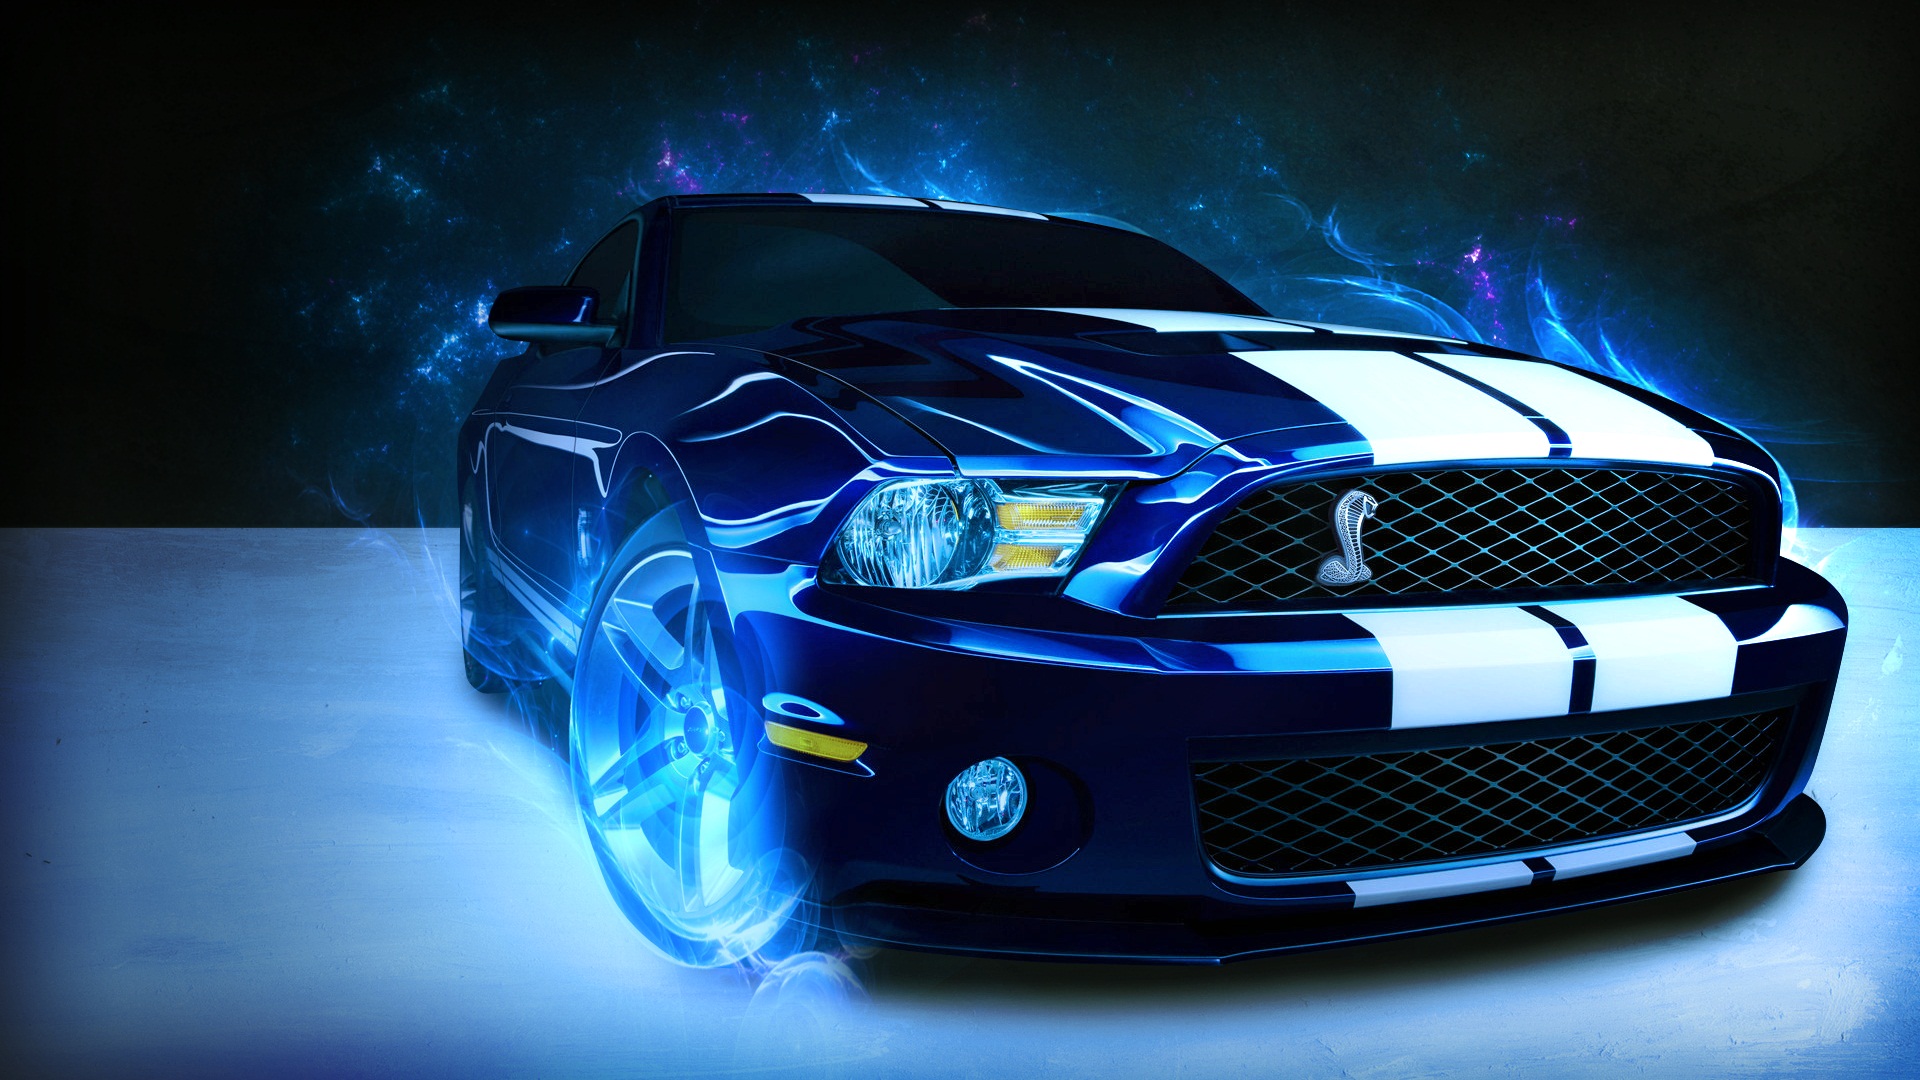 Mustang Ford Shelby Wallpaper Blue NeoHDwalls